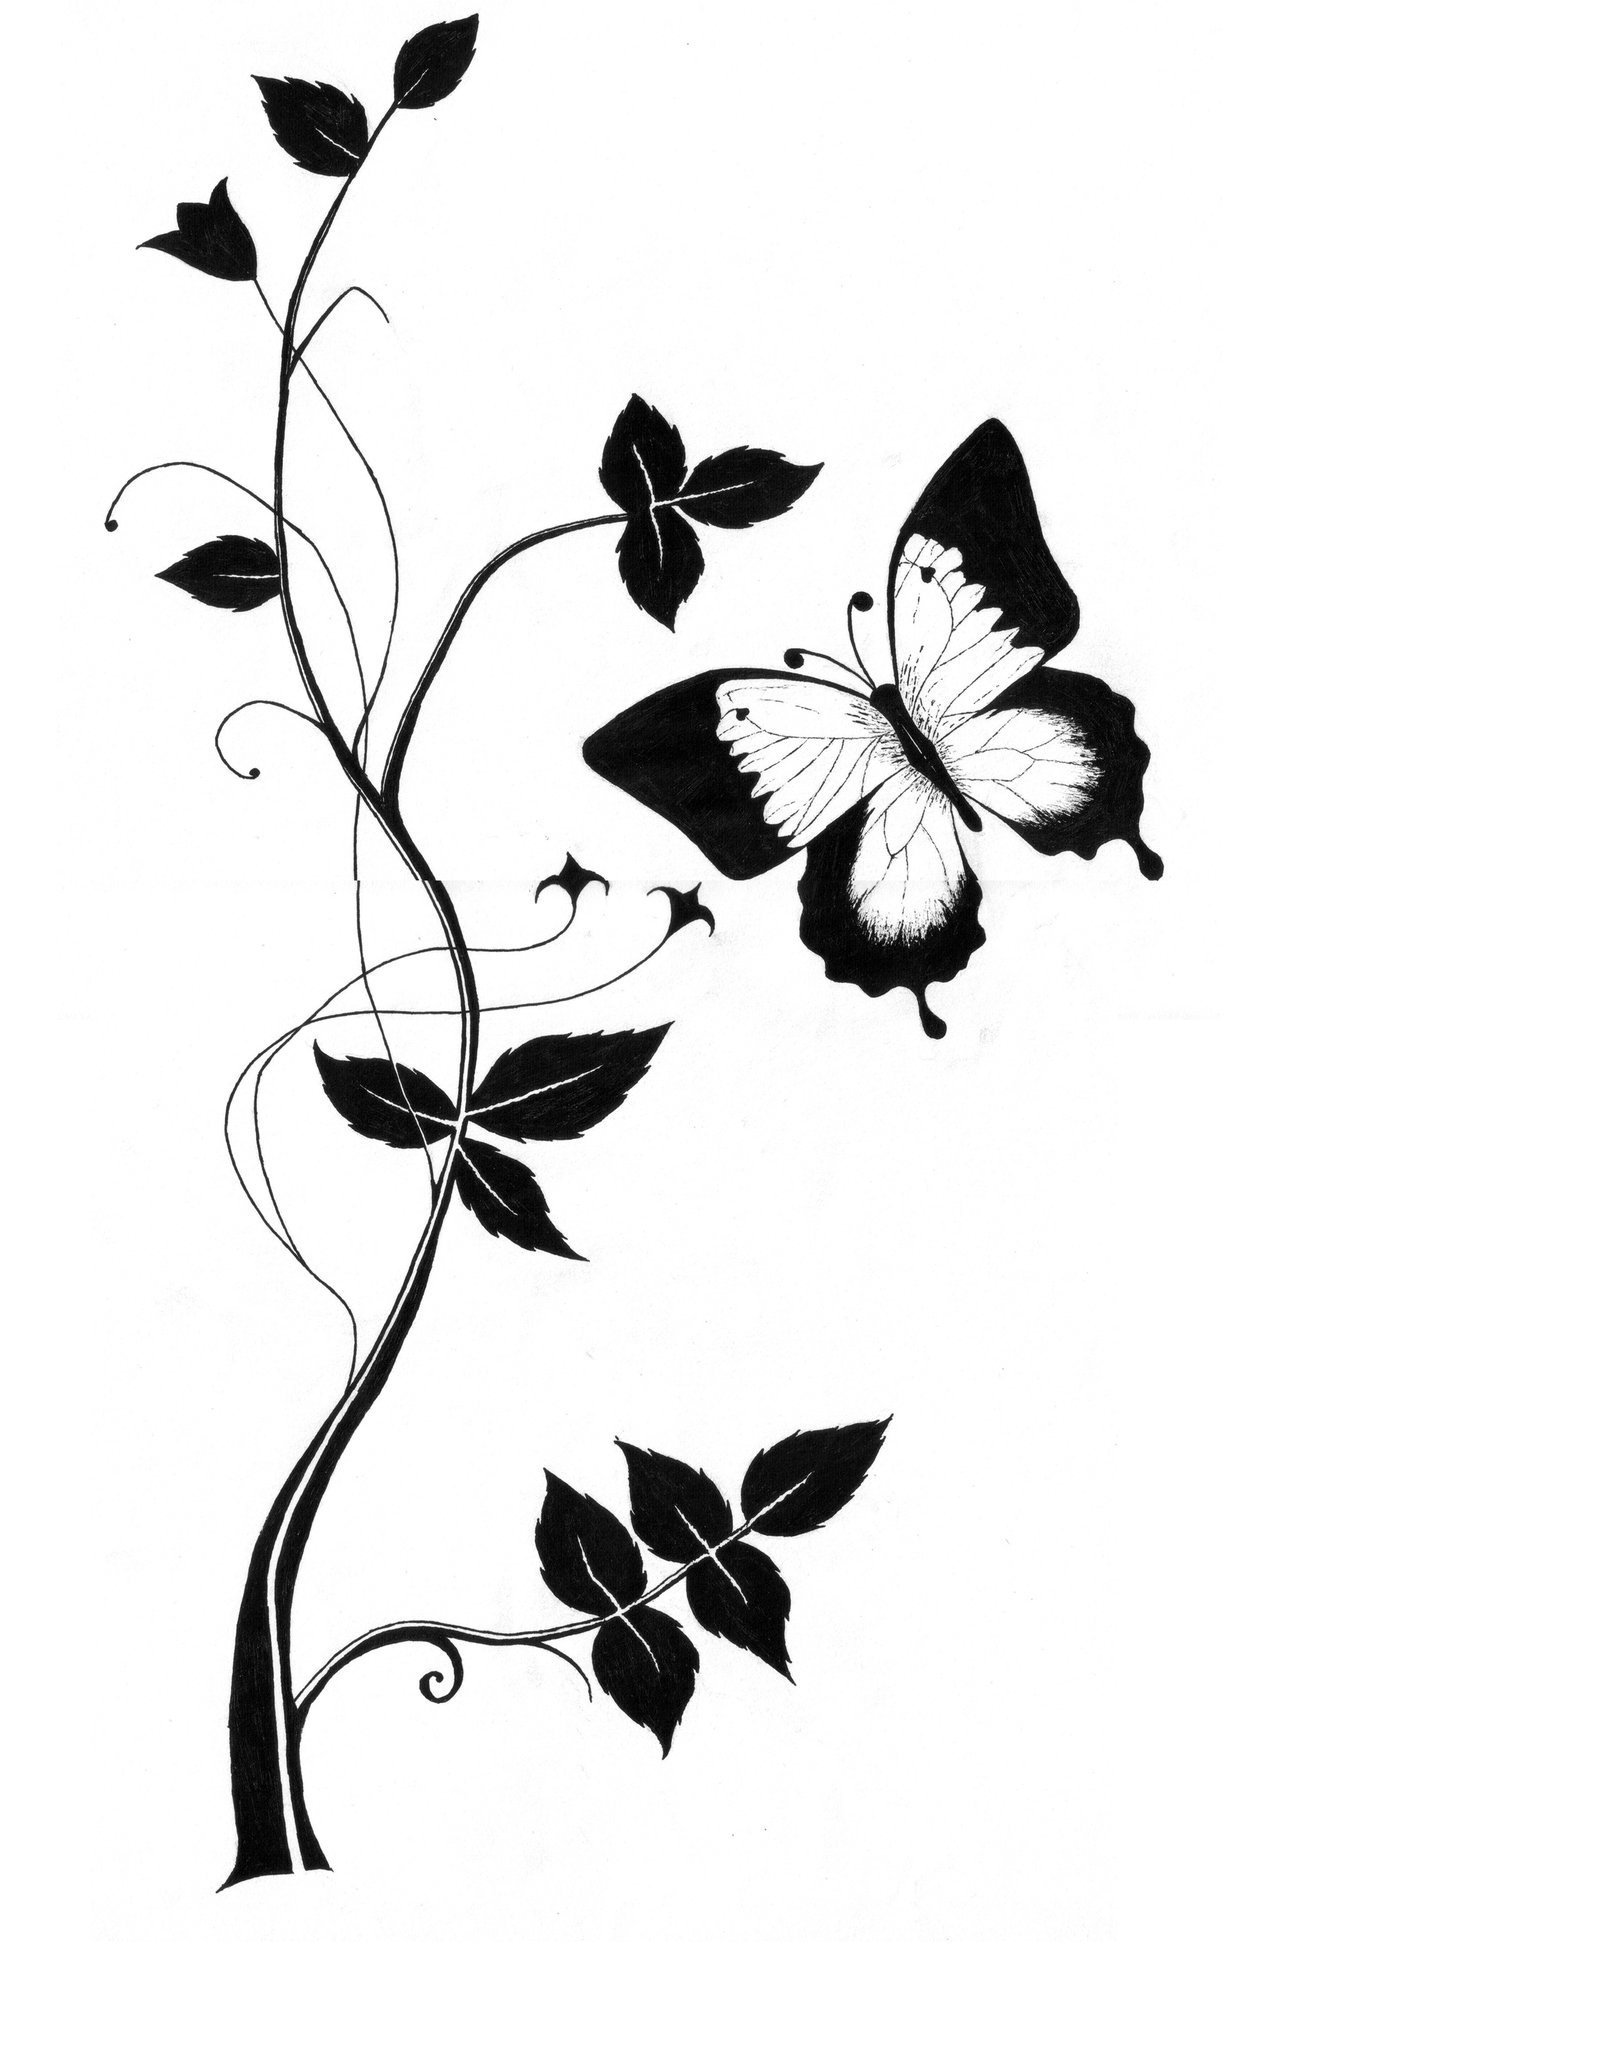 Free Butterfly Drawings Download Free Clip Art Free Clip Art On Clipart Library Try some of these tips and tricks mentioned above to enhance your ability to make mesmerizing yet easy flower pencil drawings for inspiration. clipart library